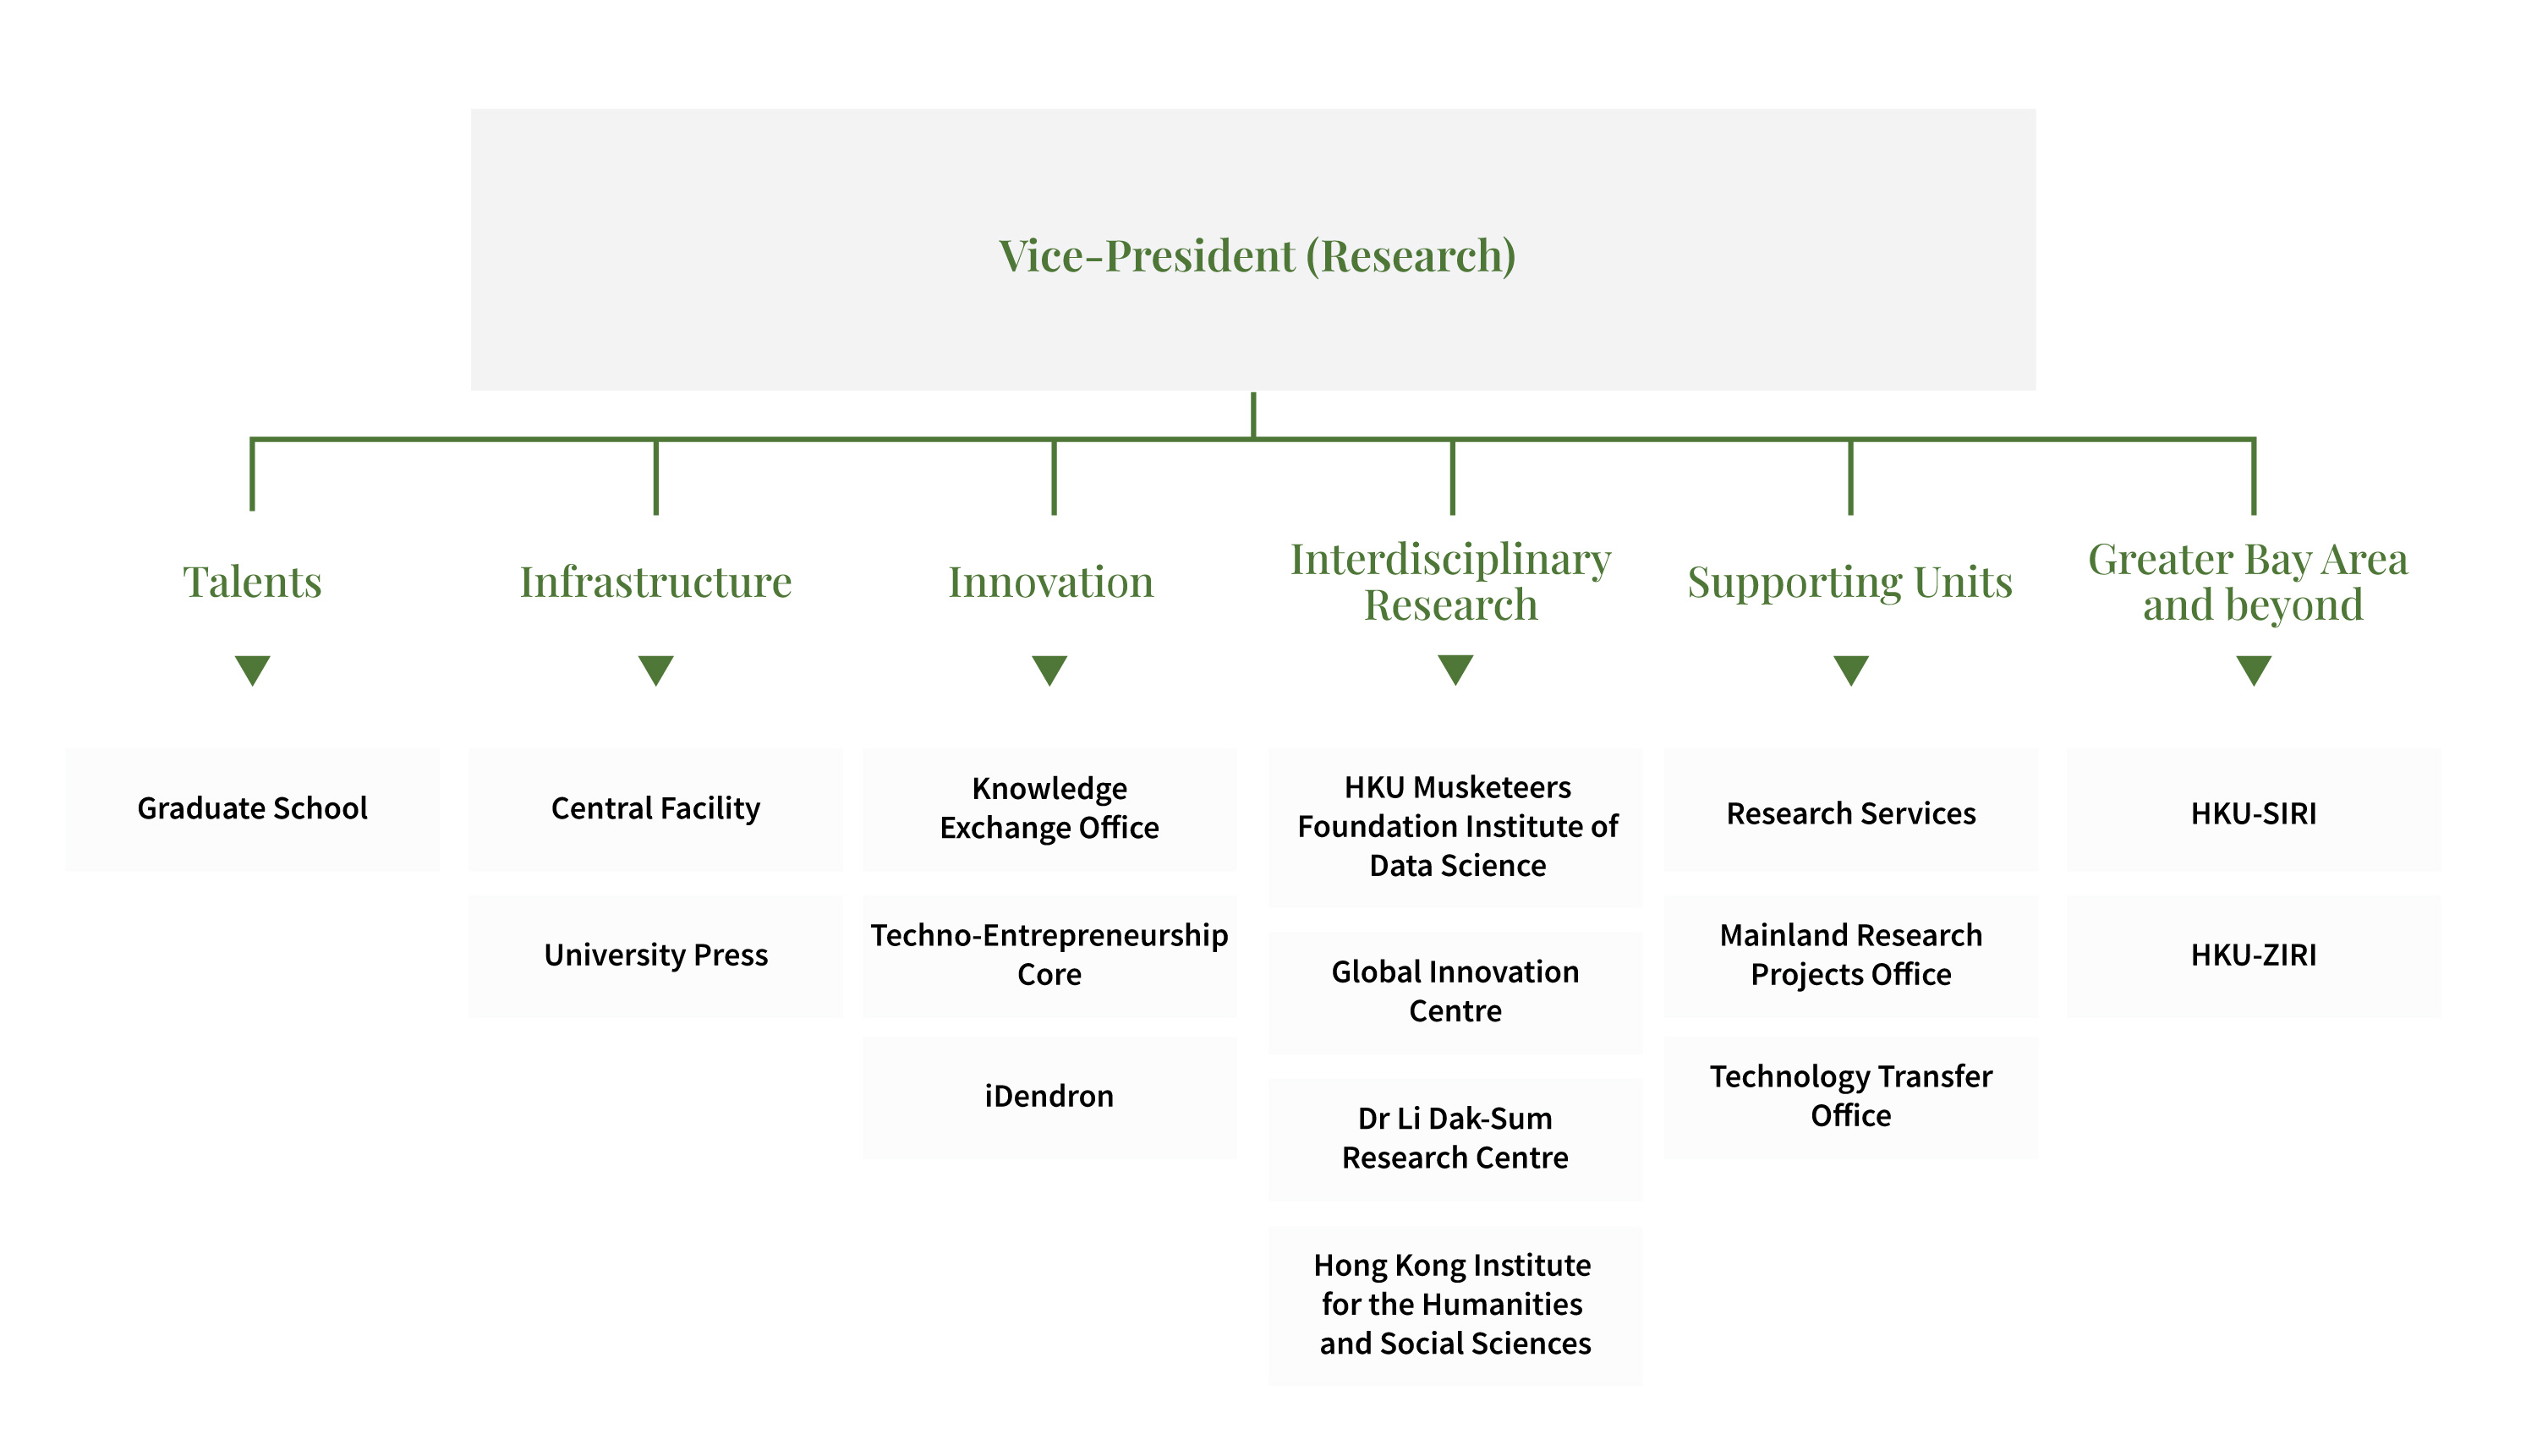 Research Org-Chart